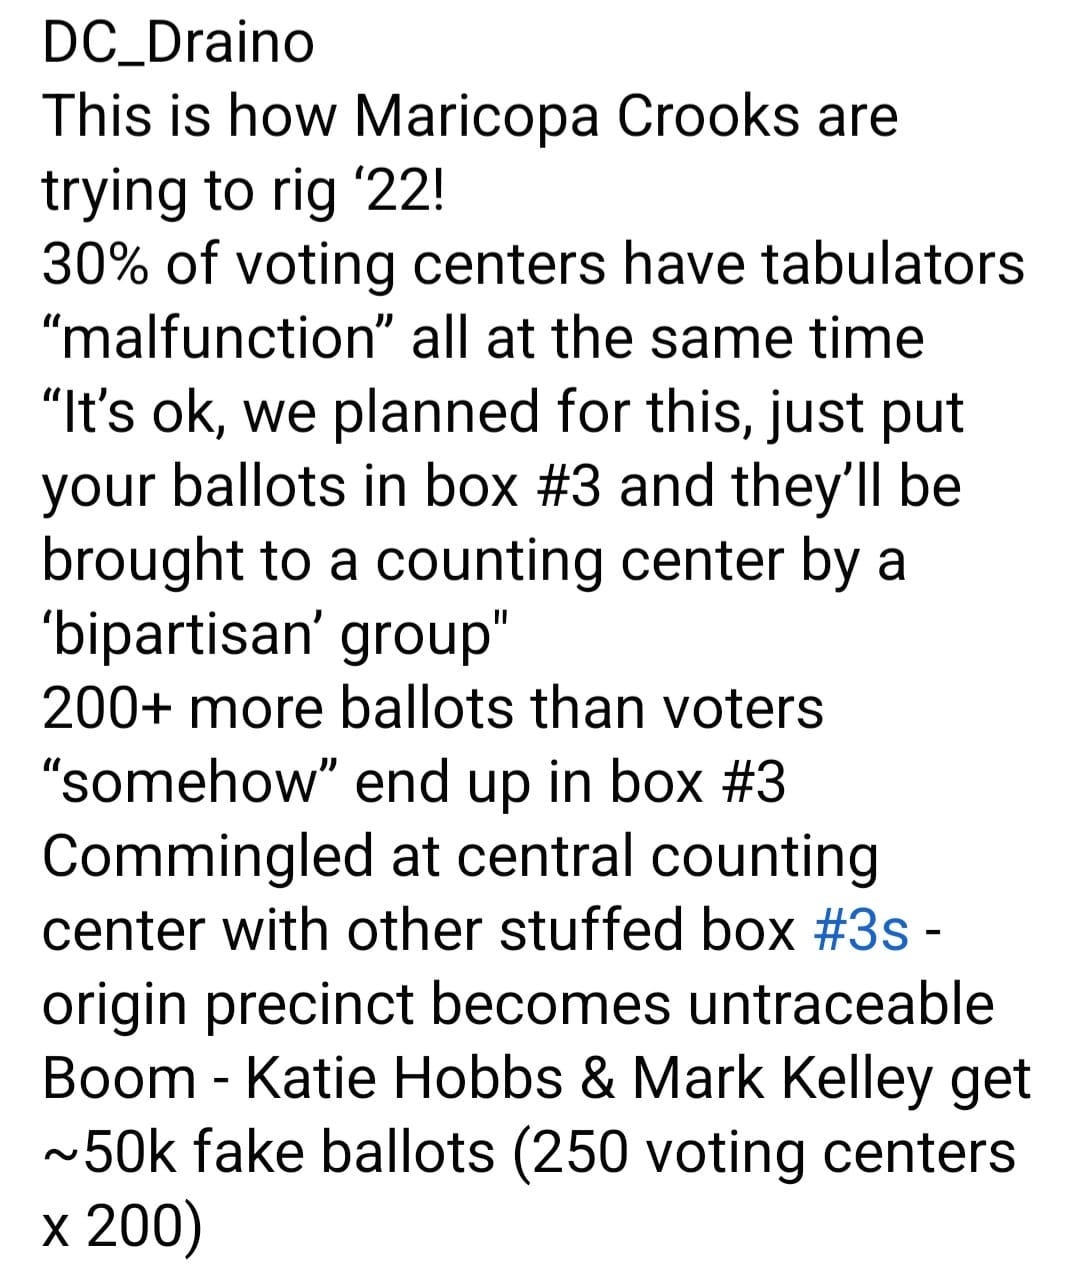 May be an image of text that says 'DC_Draino This is how Maricopa Crooks are trying to rig '22! 30% of voting centers have tabulators "malfunction" all at the same time "It's ok, we planned for this, just put your ballots in box #3 and they'll be brought to a counting center by a 'bipartisan' group" 200+ more ballots than voters "somehow" end up in box #3 Commingled at central counting center with other stuffed box #3s- origin precinct becomes untraceable Boom Katie Hobbs & Mark Kelley get ~50k fake ballots 250 voting centers X 200)'